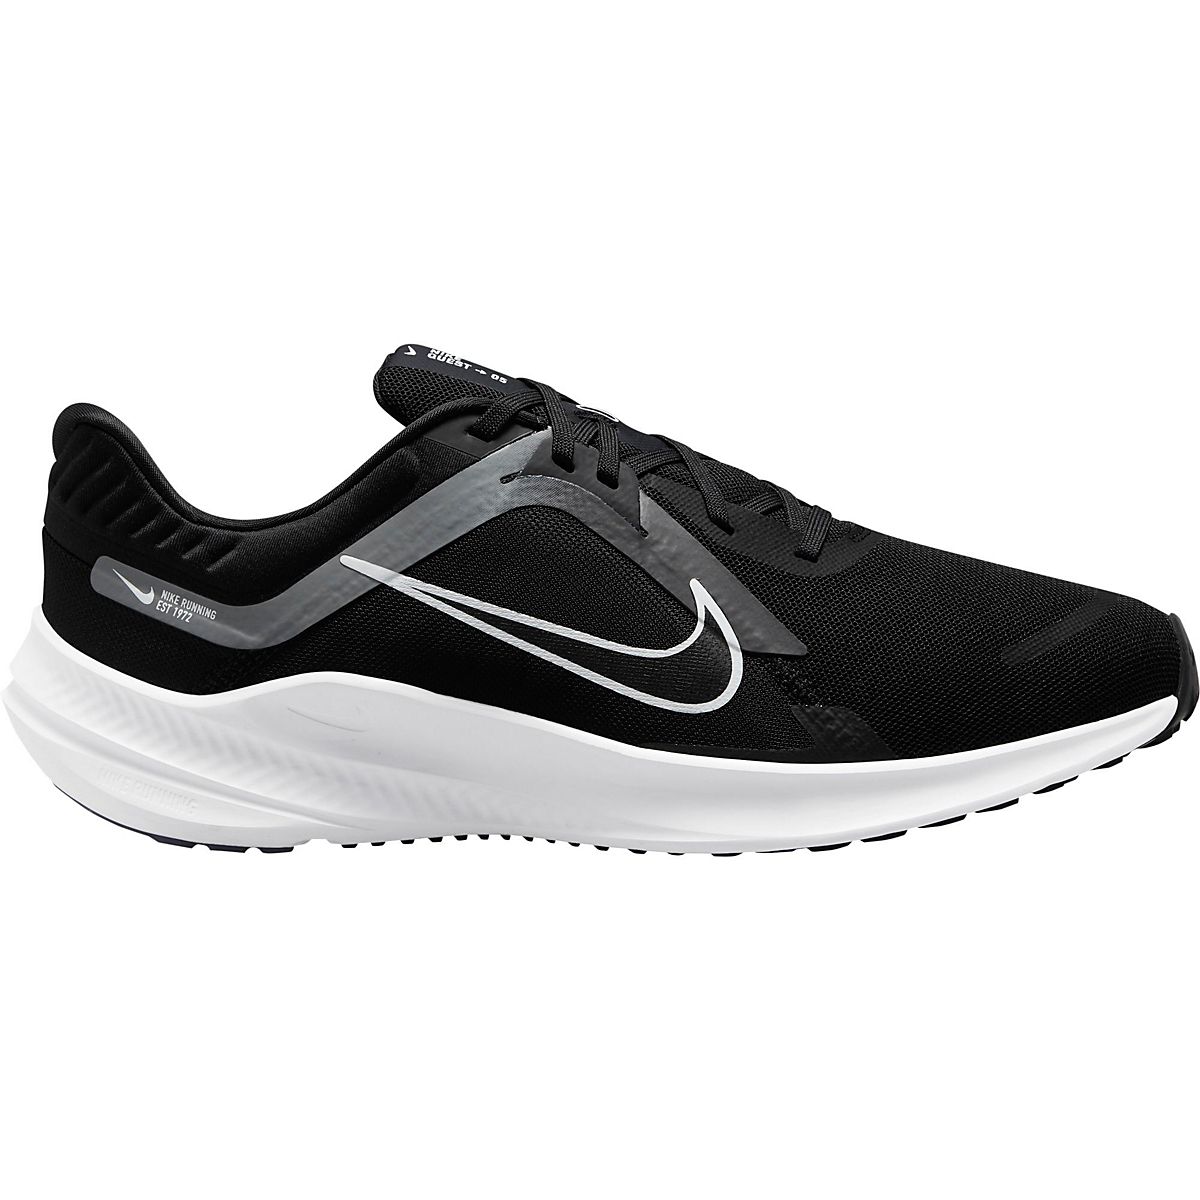 Nike Men's Quest 5 Road Running Shoes | Free Shipping at Academy